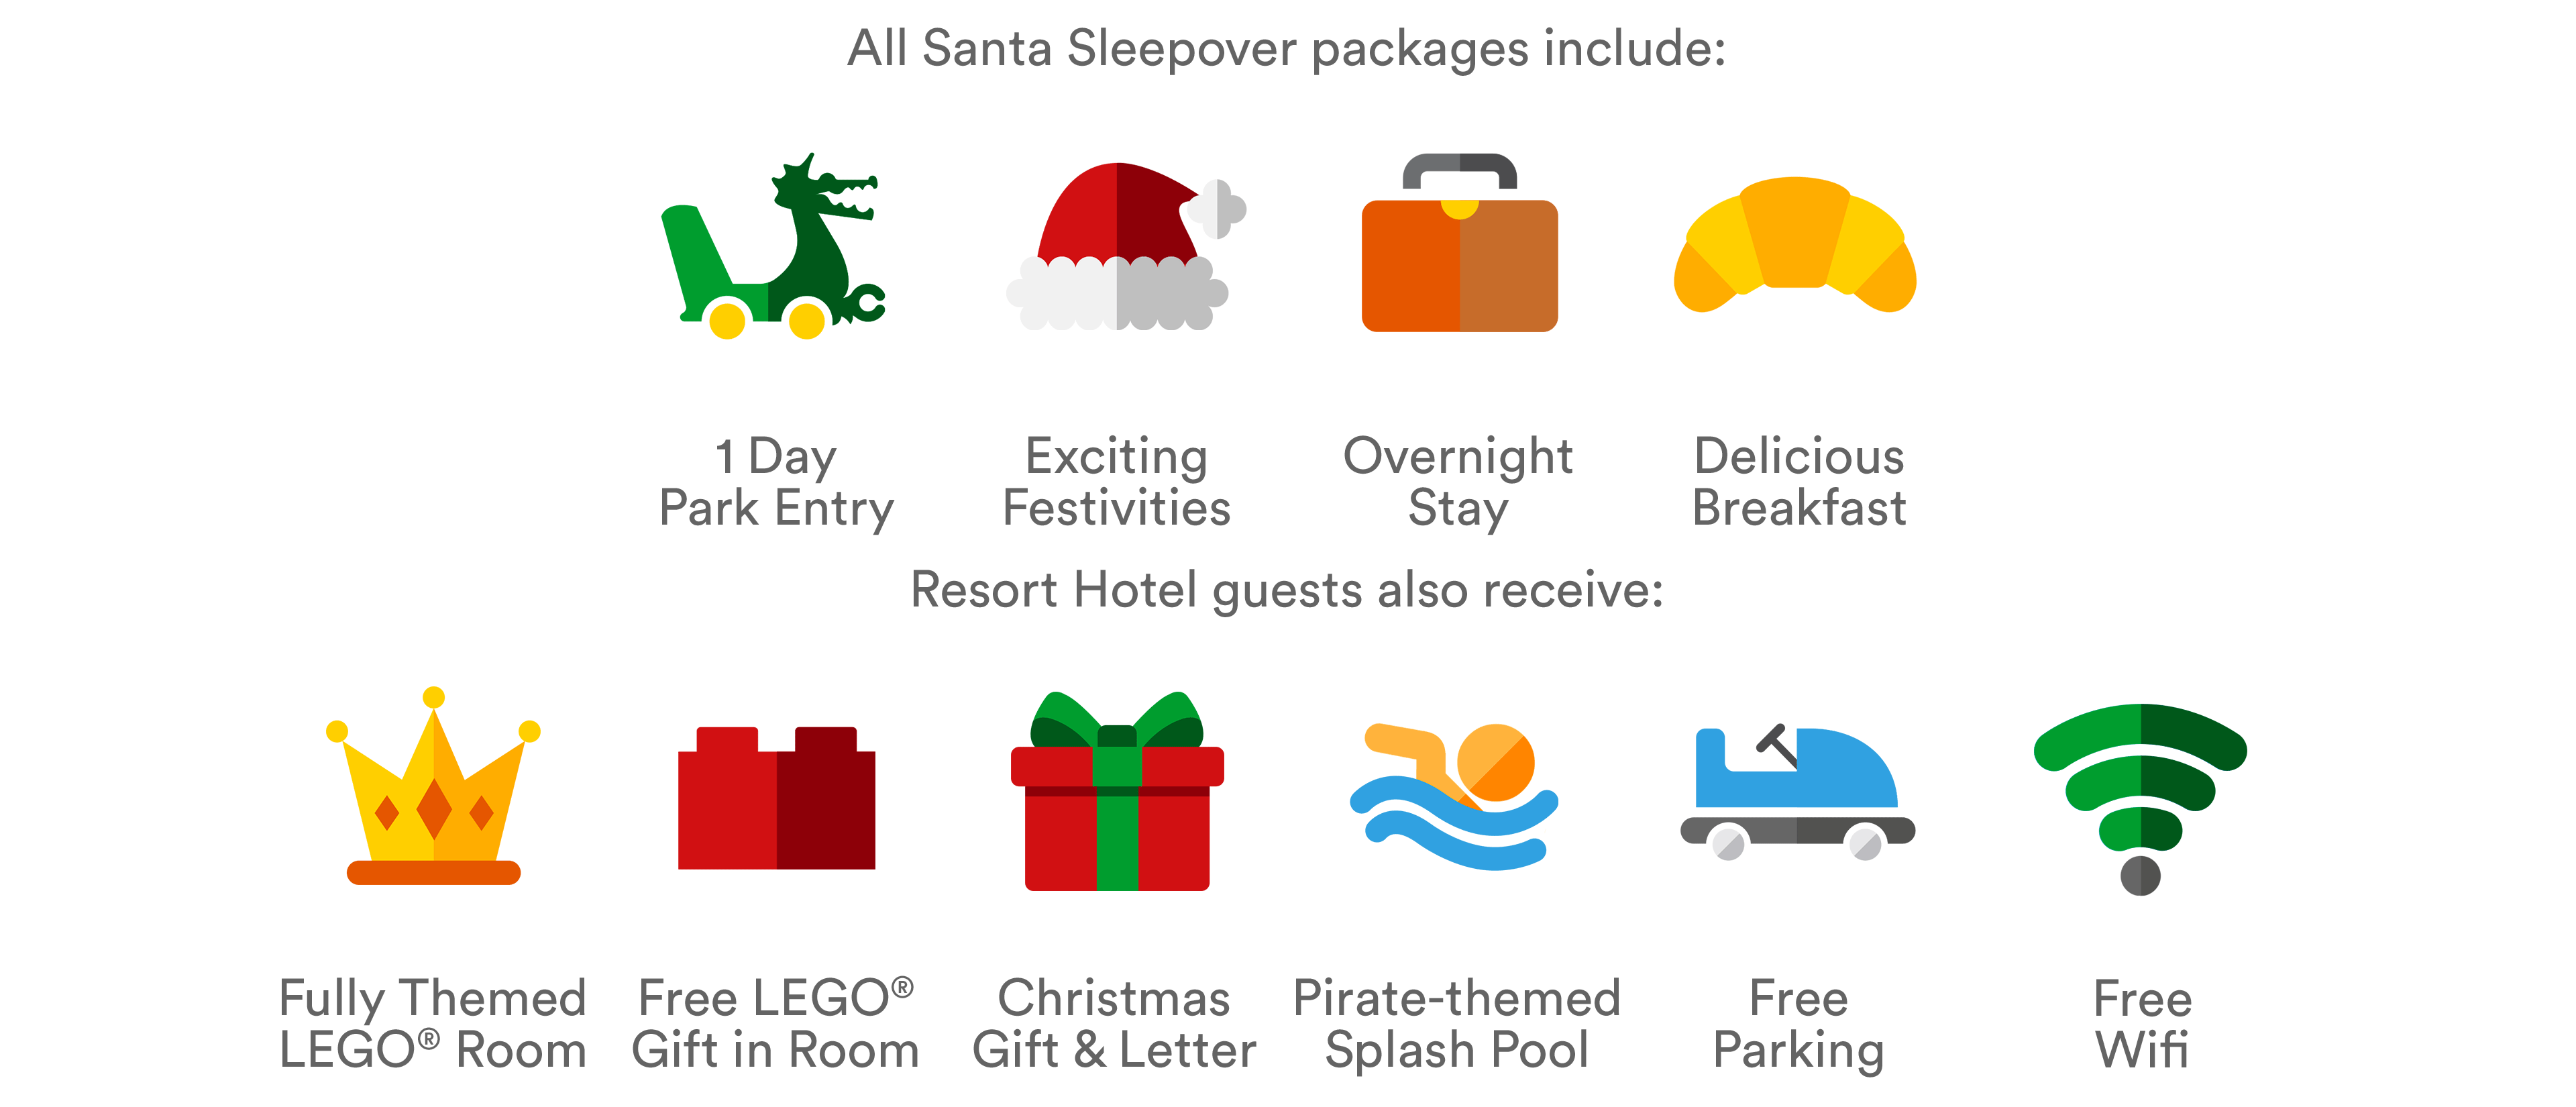 LEGOLAND Windsor Resort Santa Sleepover packages include: an overnight Resort stay, breakfast, evening entertainment, free parking, Father Christmas meet & greet and more!